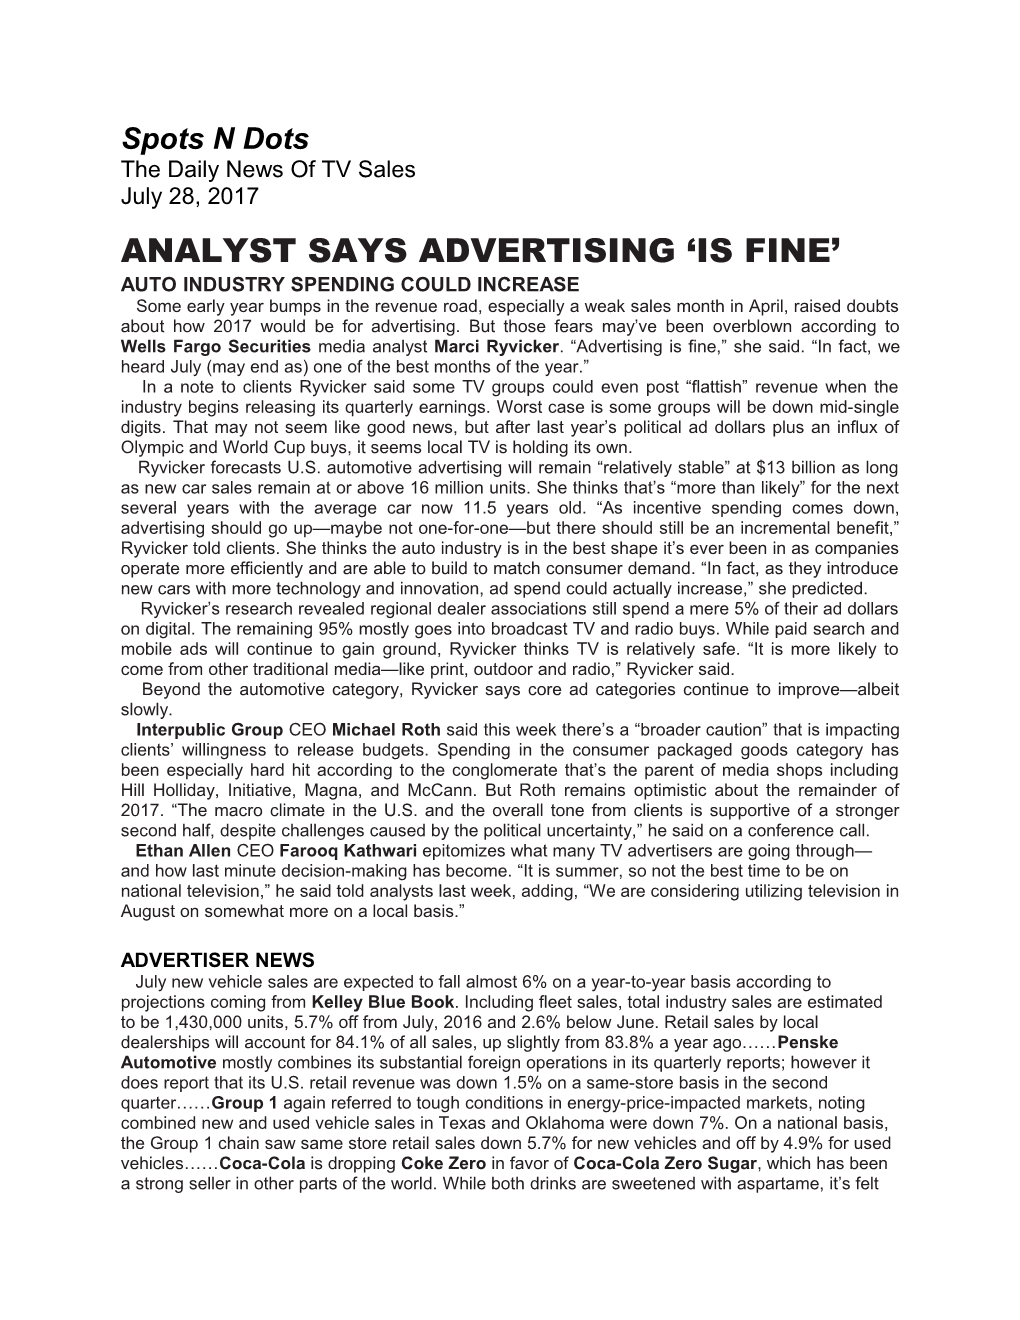 Analyst Says Advertising Is Fine